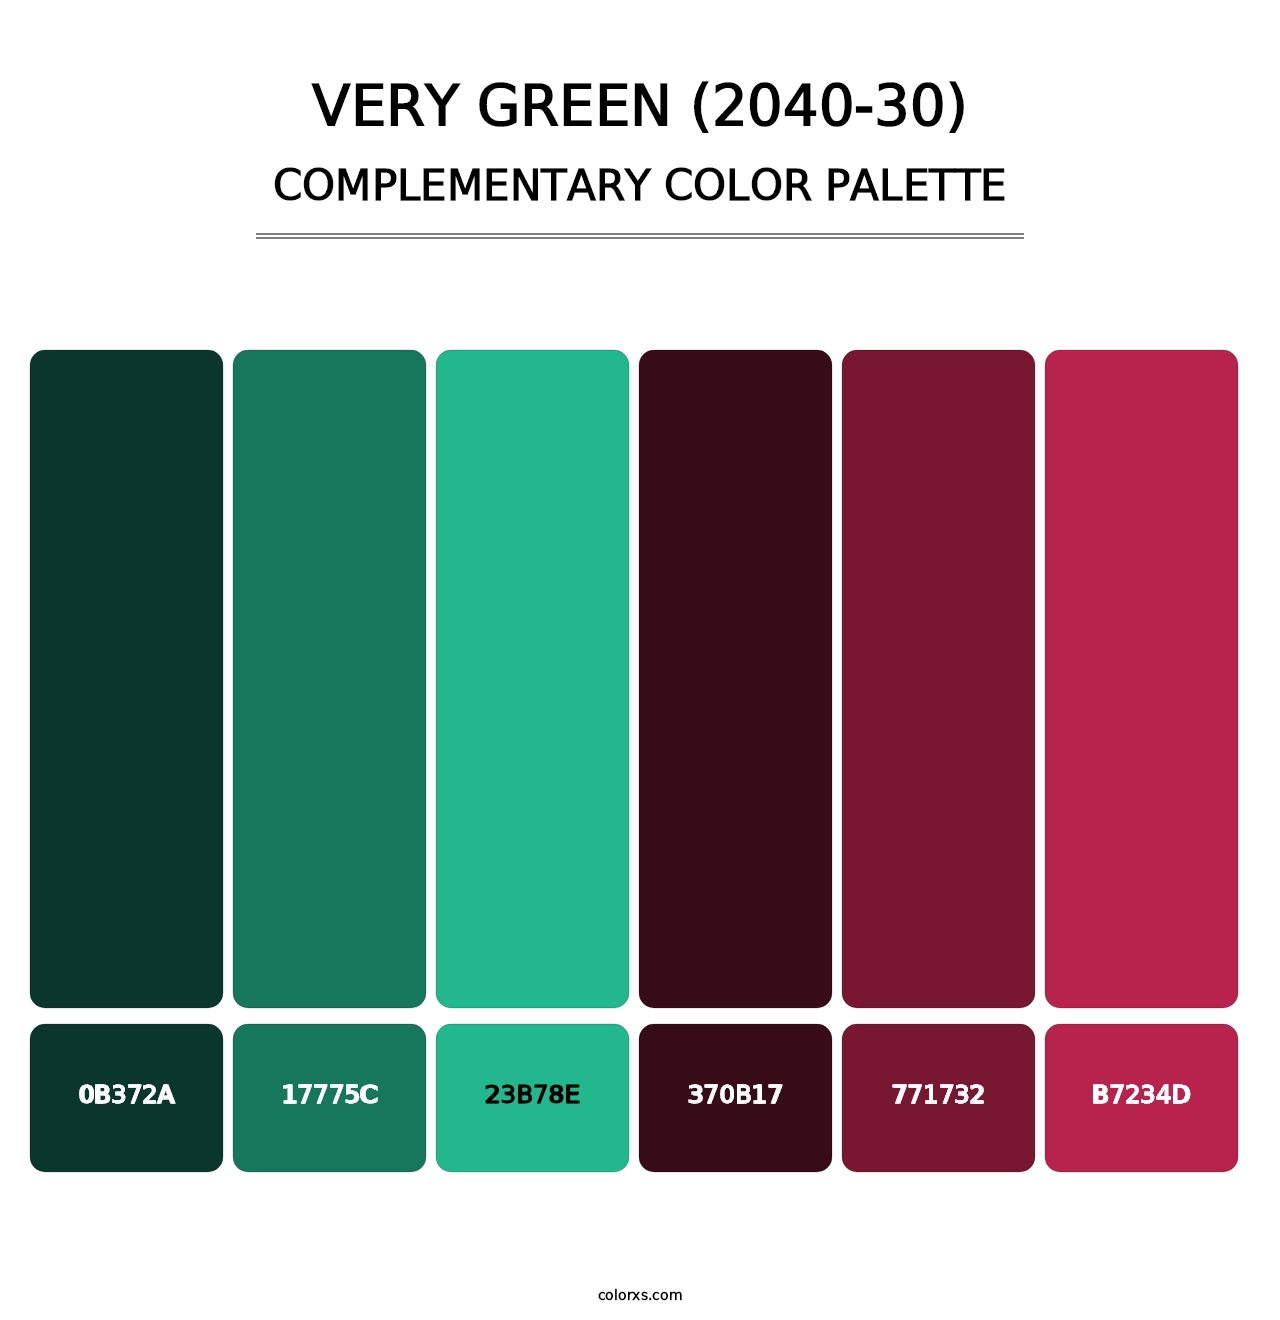 Very Green (2040-30) - Complementary Color Palette